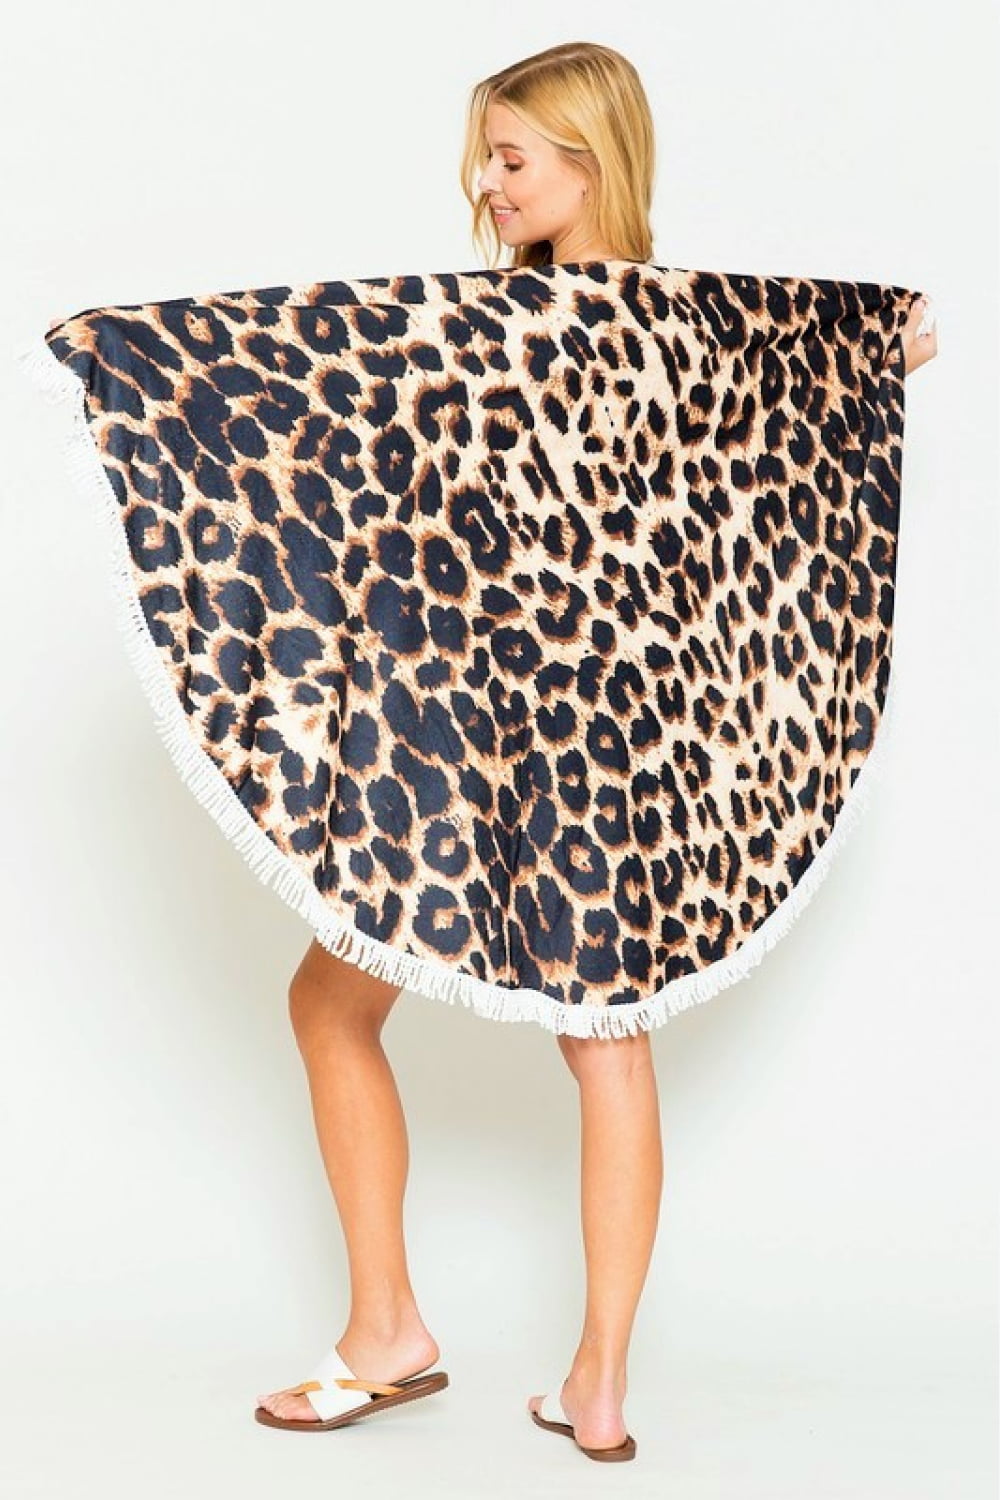 Justin Taylor Wild Zone Rounded Leopard Beach Towel